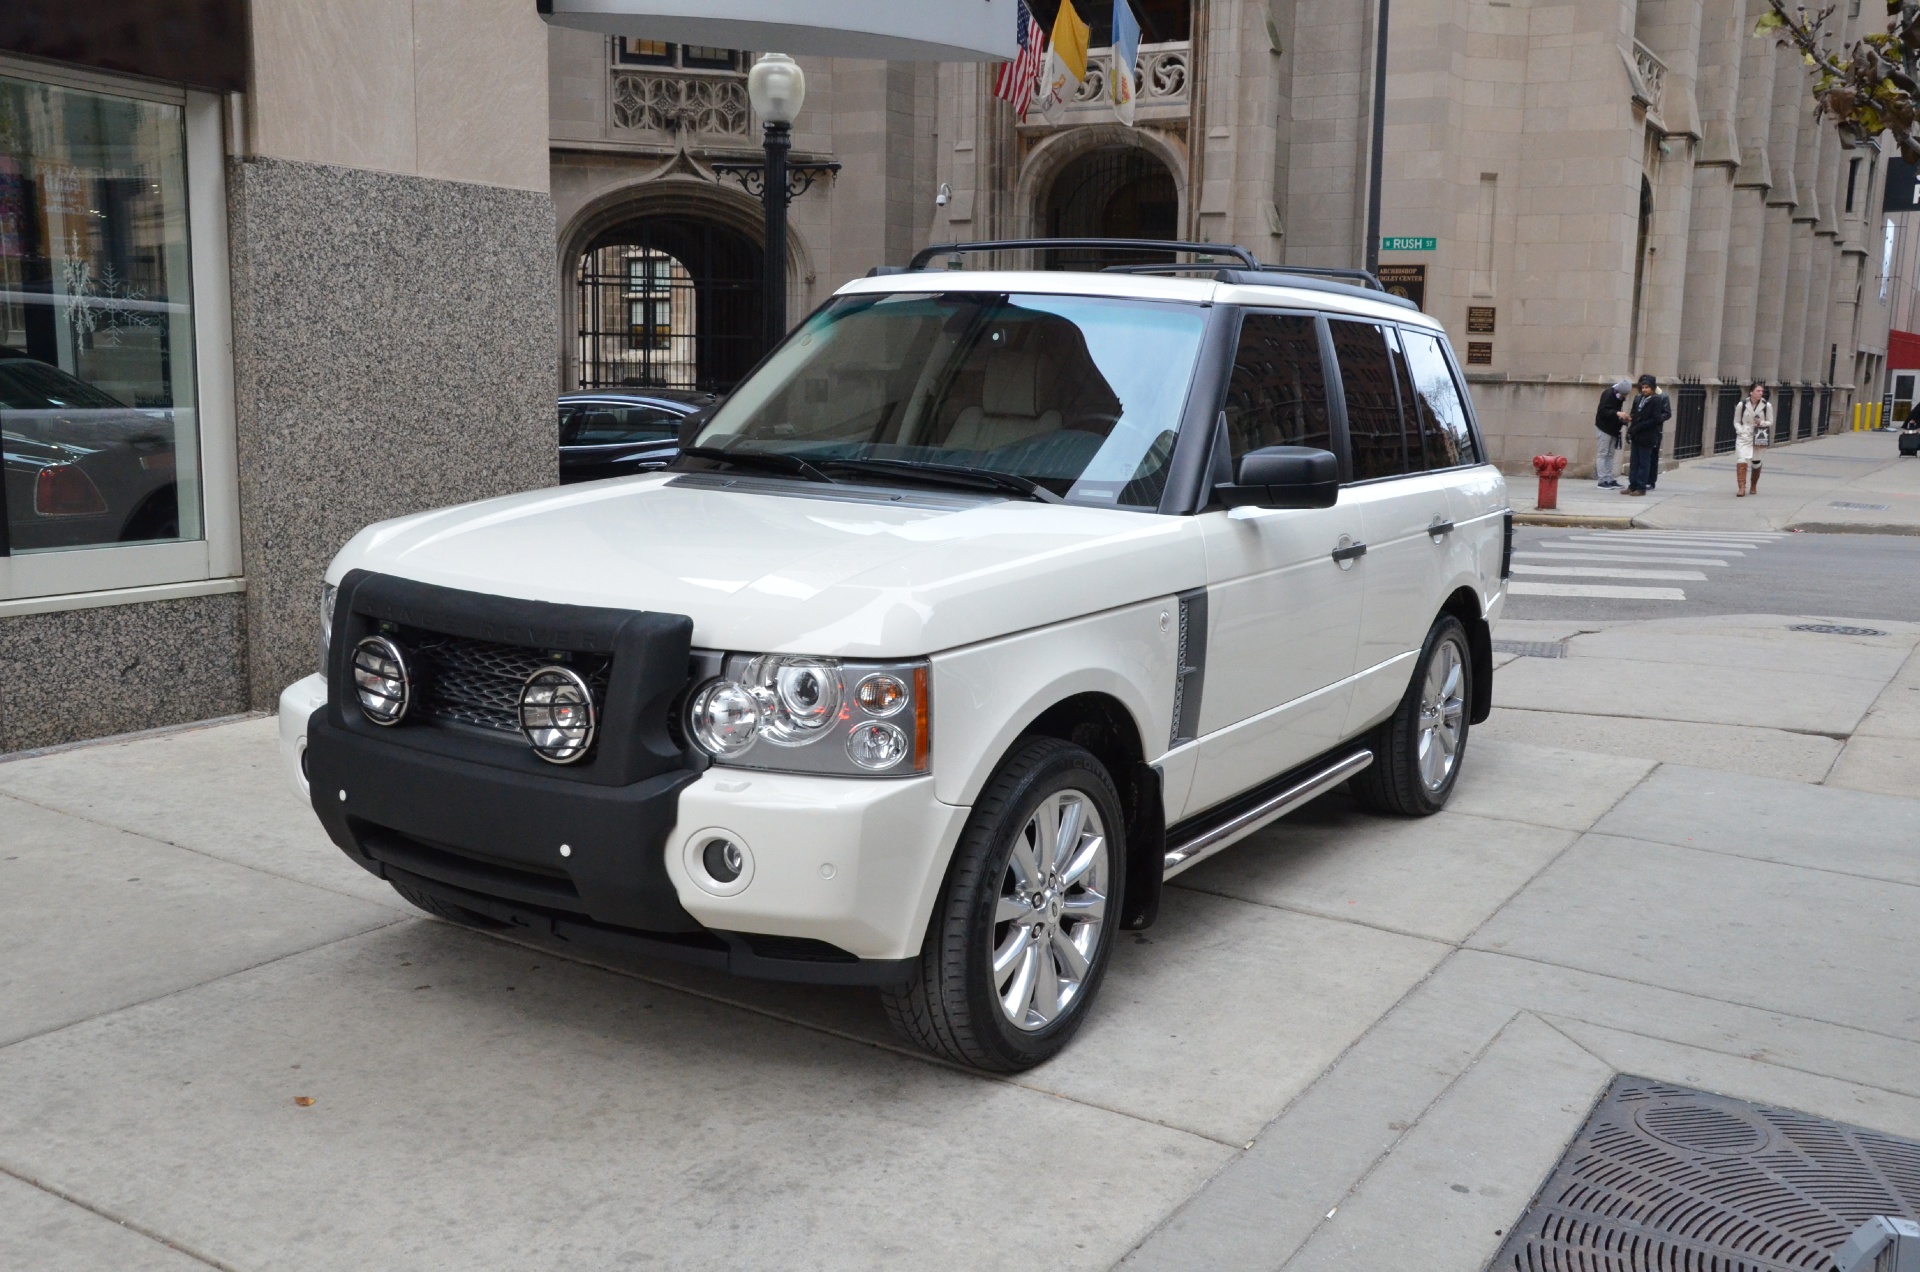 2008 Land Rover Range Rover Supercharged Stock # M191A for sale near  Chicago, IL | IL Land Rover Dealer